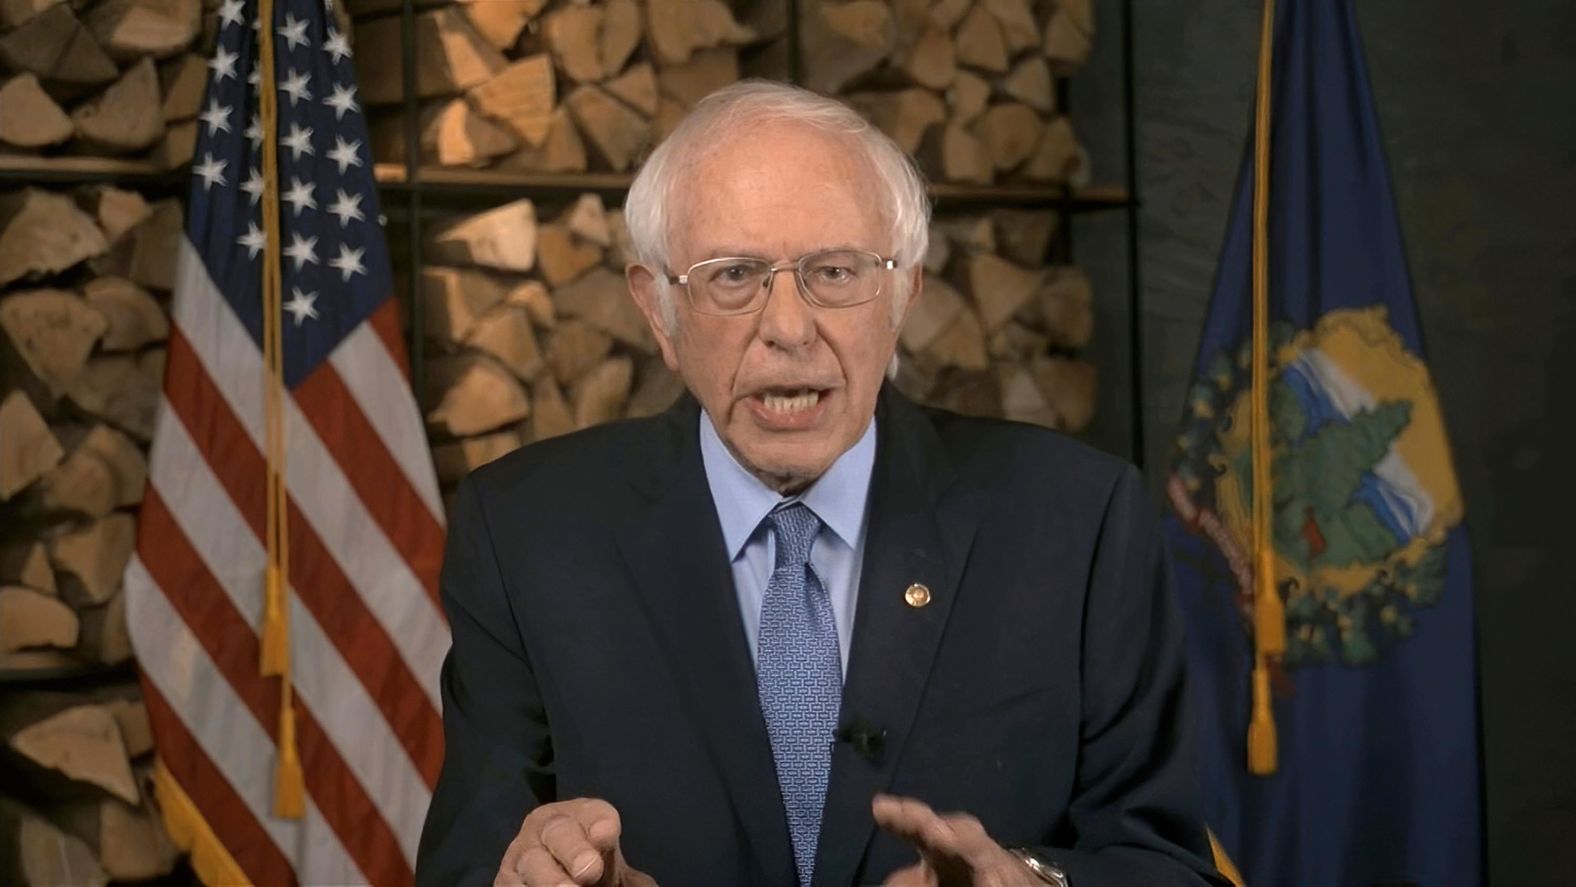 US Sen. Bernie Sanders, who finished second to Biden in the primaries, <a href="index.php?page=&url=https%3A%2F%2Fwww.cnn.com%2Fpolitics%2Flive-news%2Fdnc-2020-day-1%2Fh_d70548649ed5f051bbf13812b836e389" target="_blank">urged his supporters to back Biden</a> in November: "Many of the ideas we fought for that just a few years ago were considered radical are now mainstream. But let us be clear. If Donald Trump is re-elected, all the progress we have made will be in jeopardy."